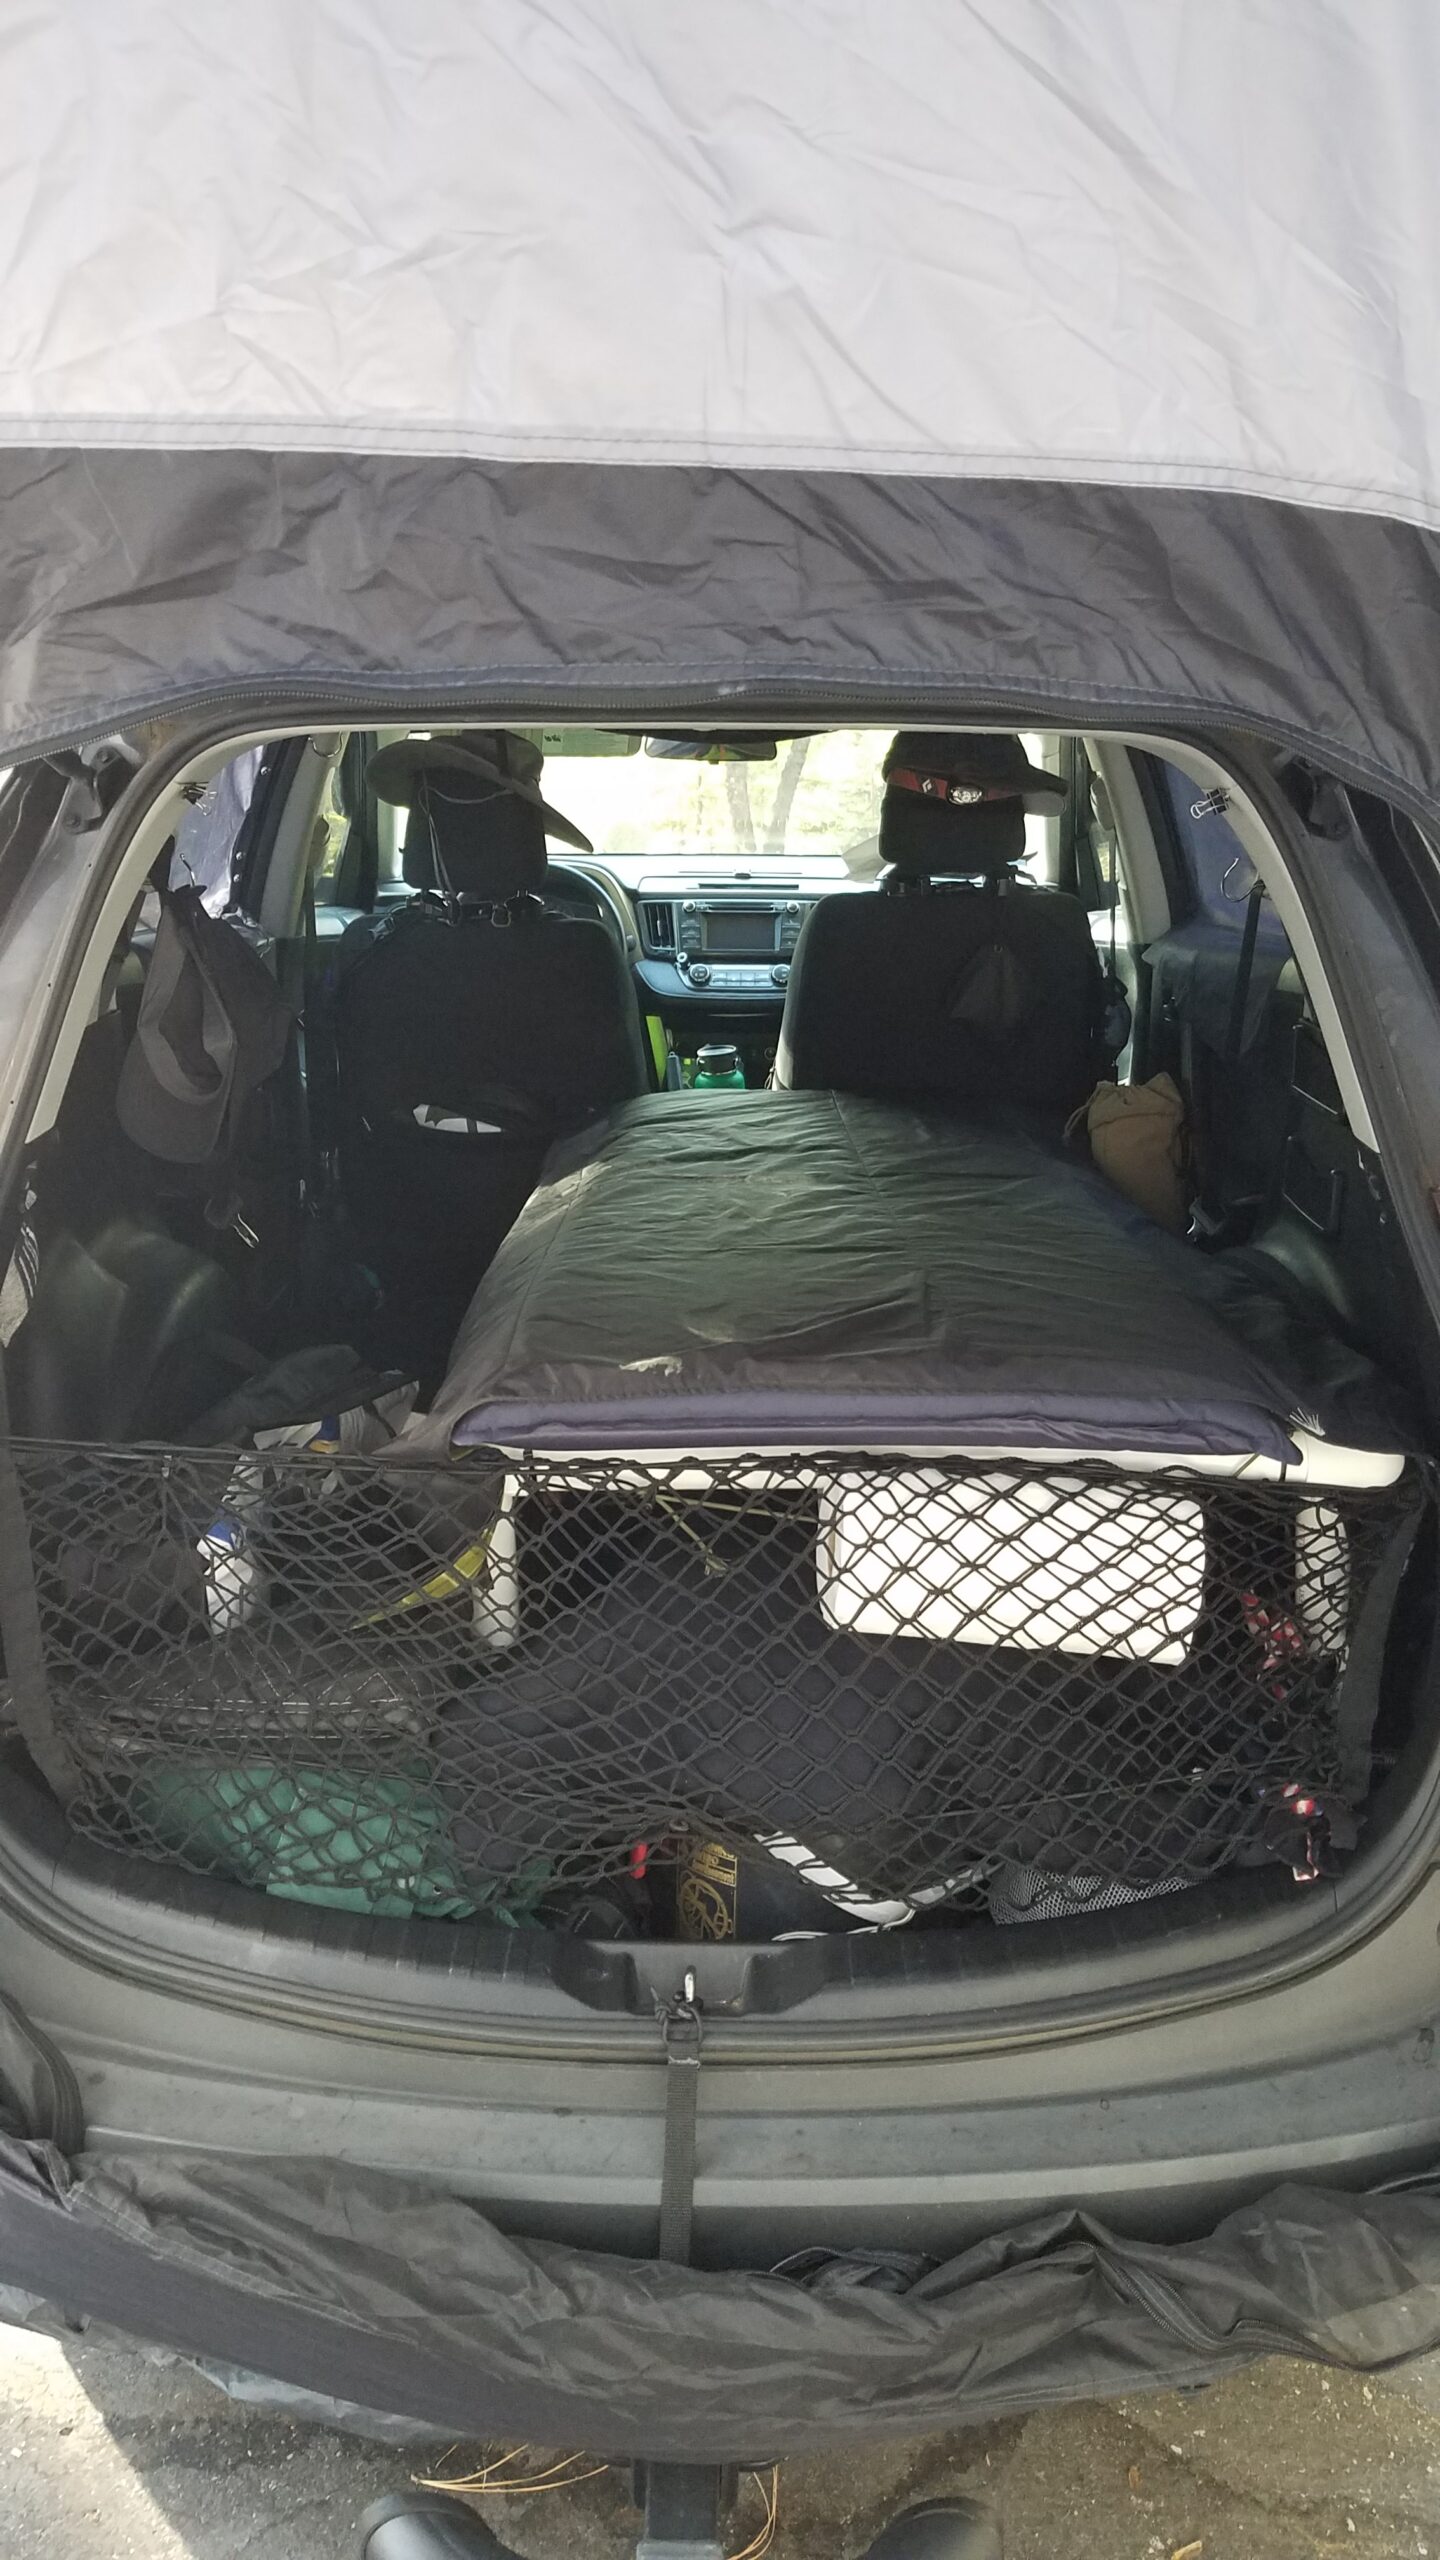 The setup in my Rav4, looking from the back